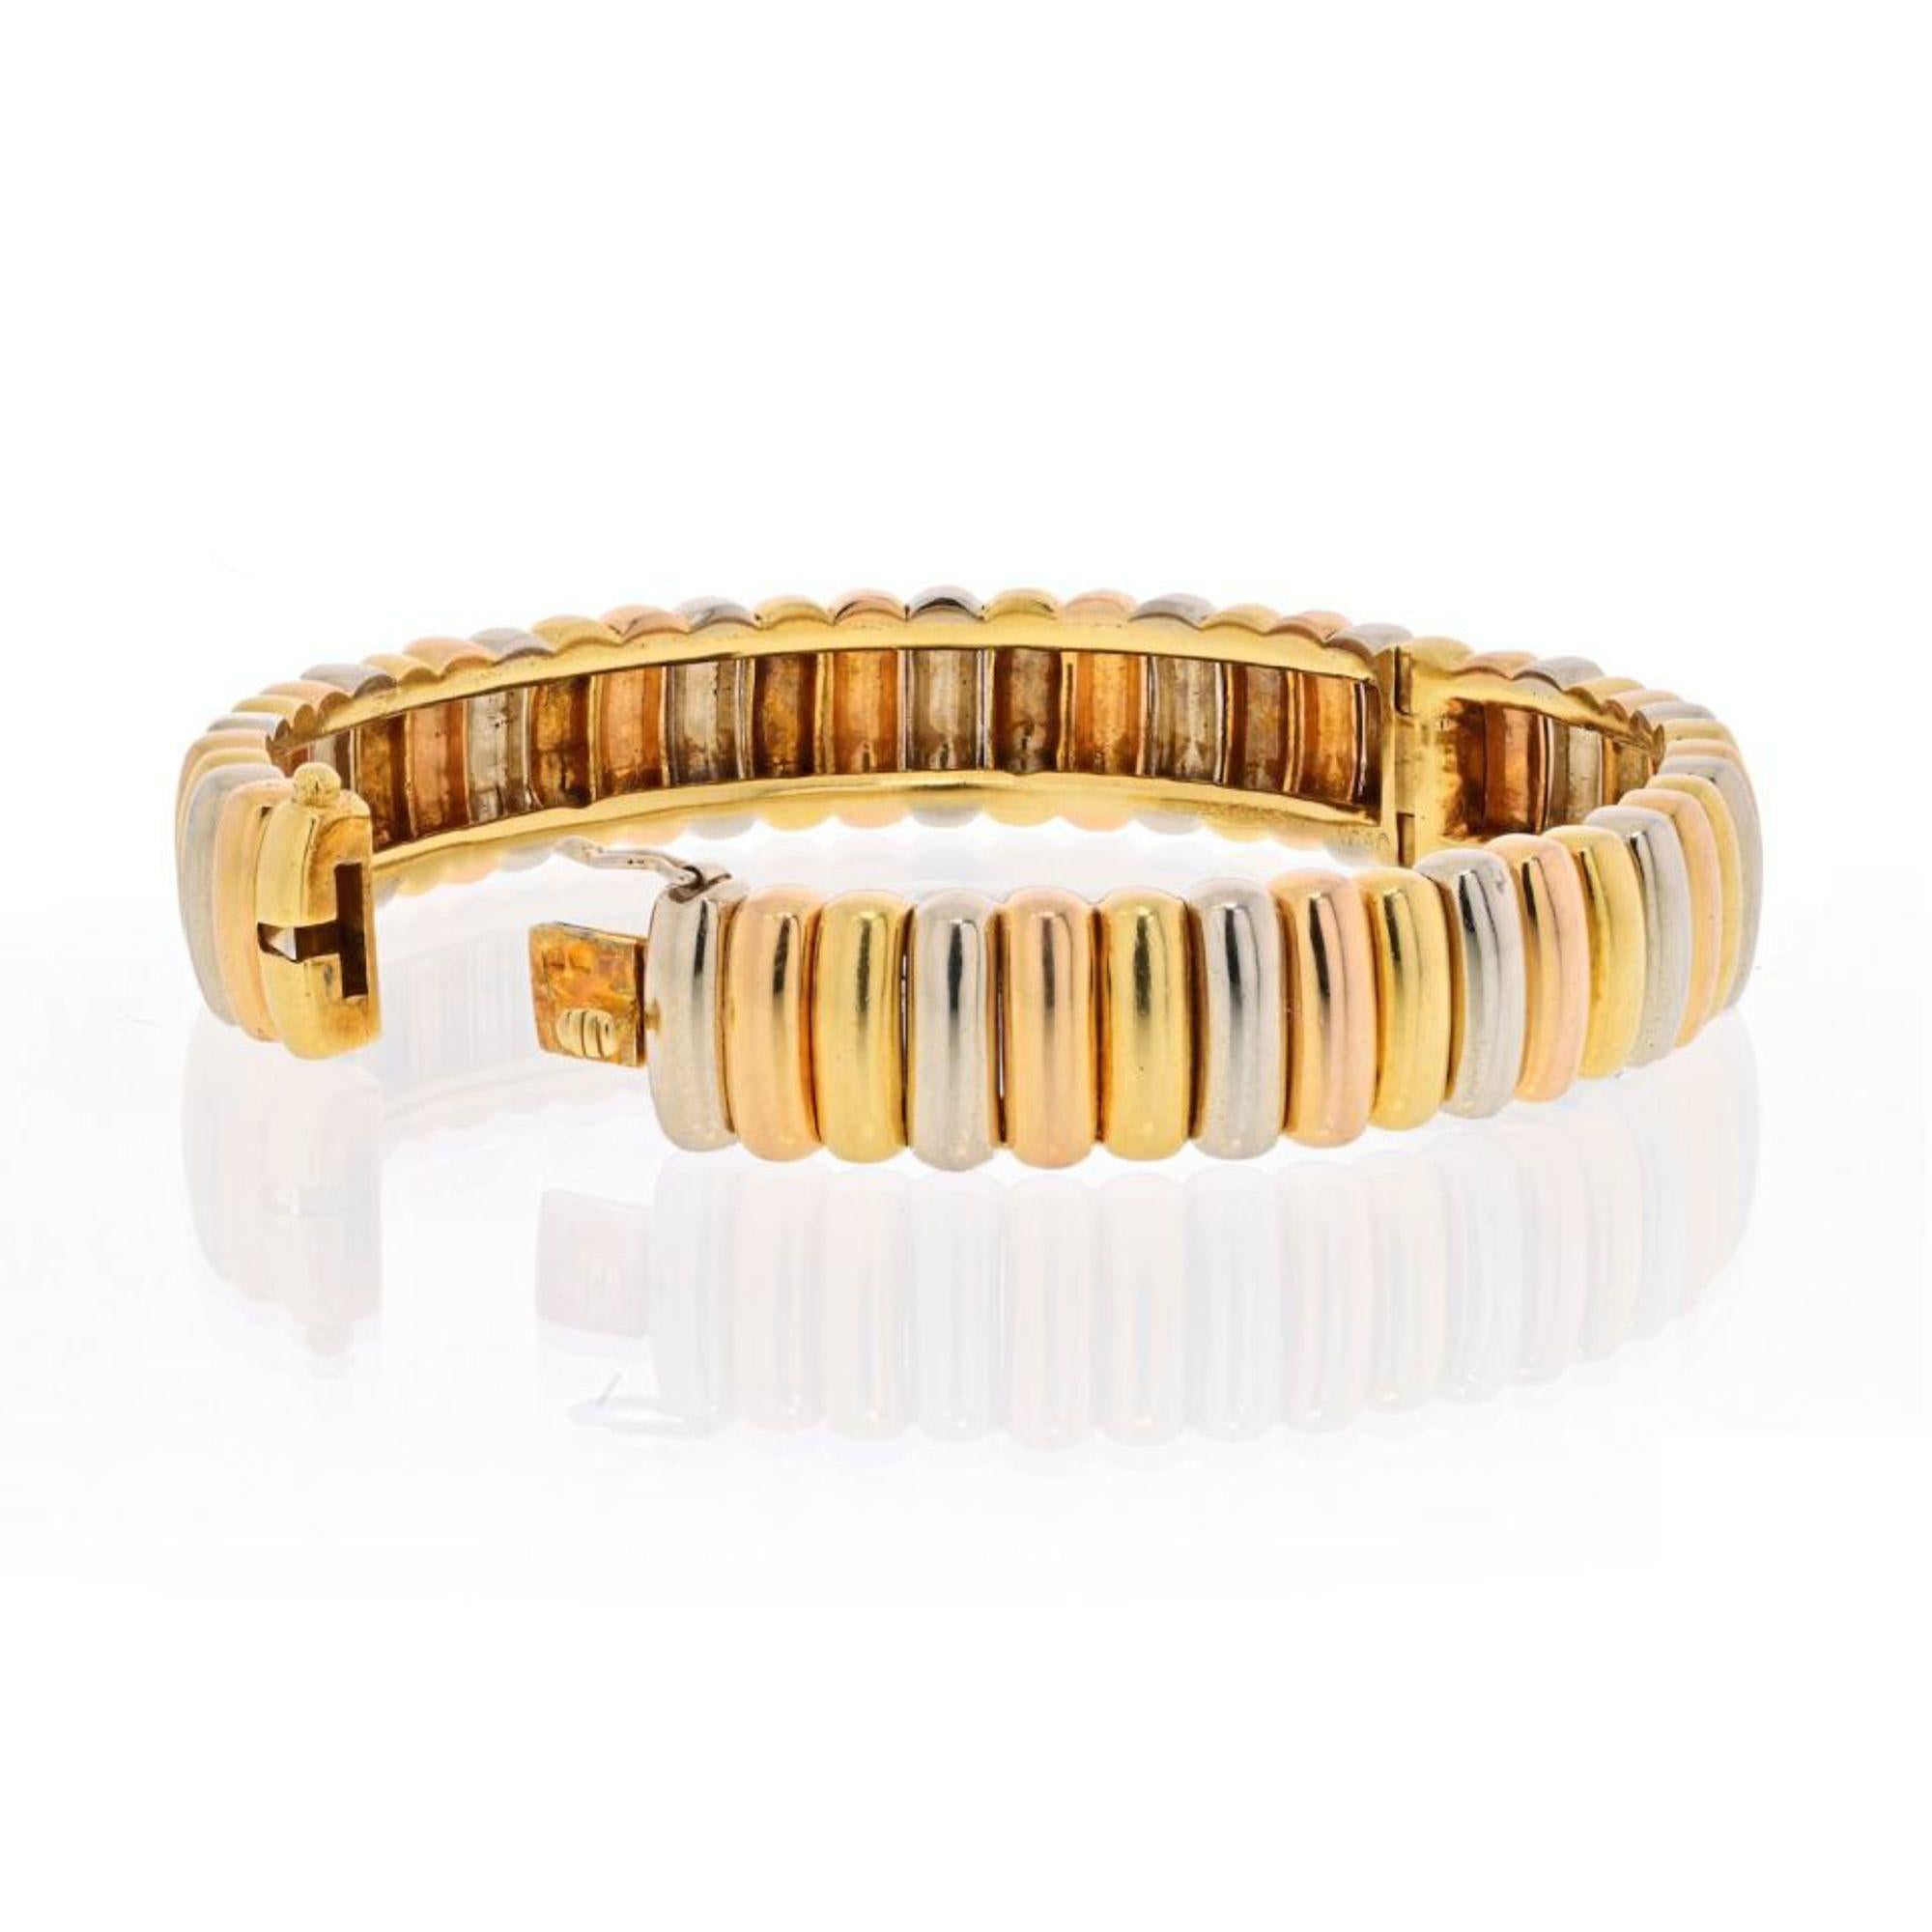 Vintage Van Cleef & Arpels Tri-color, 18K  white, rose and yellow gold fluted bangle bracelet. The articulated bangle of fluted design, length approximately 6.5 inches. French assay mark for gold. Stamped with French assay mark for 18 carat gold to